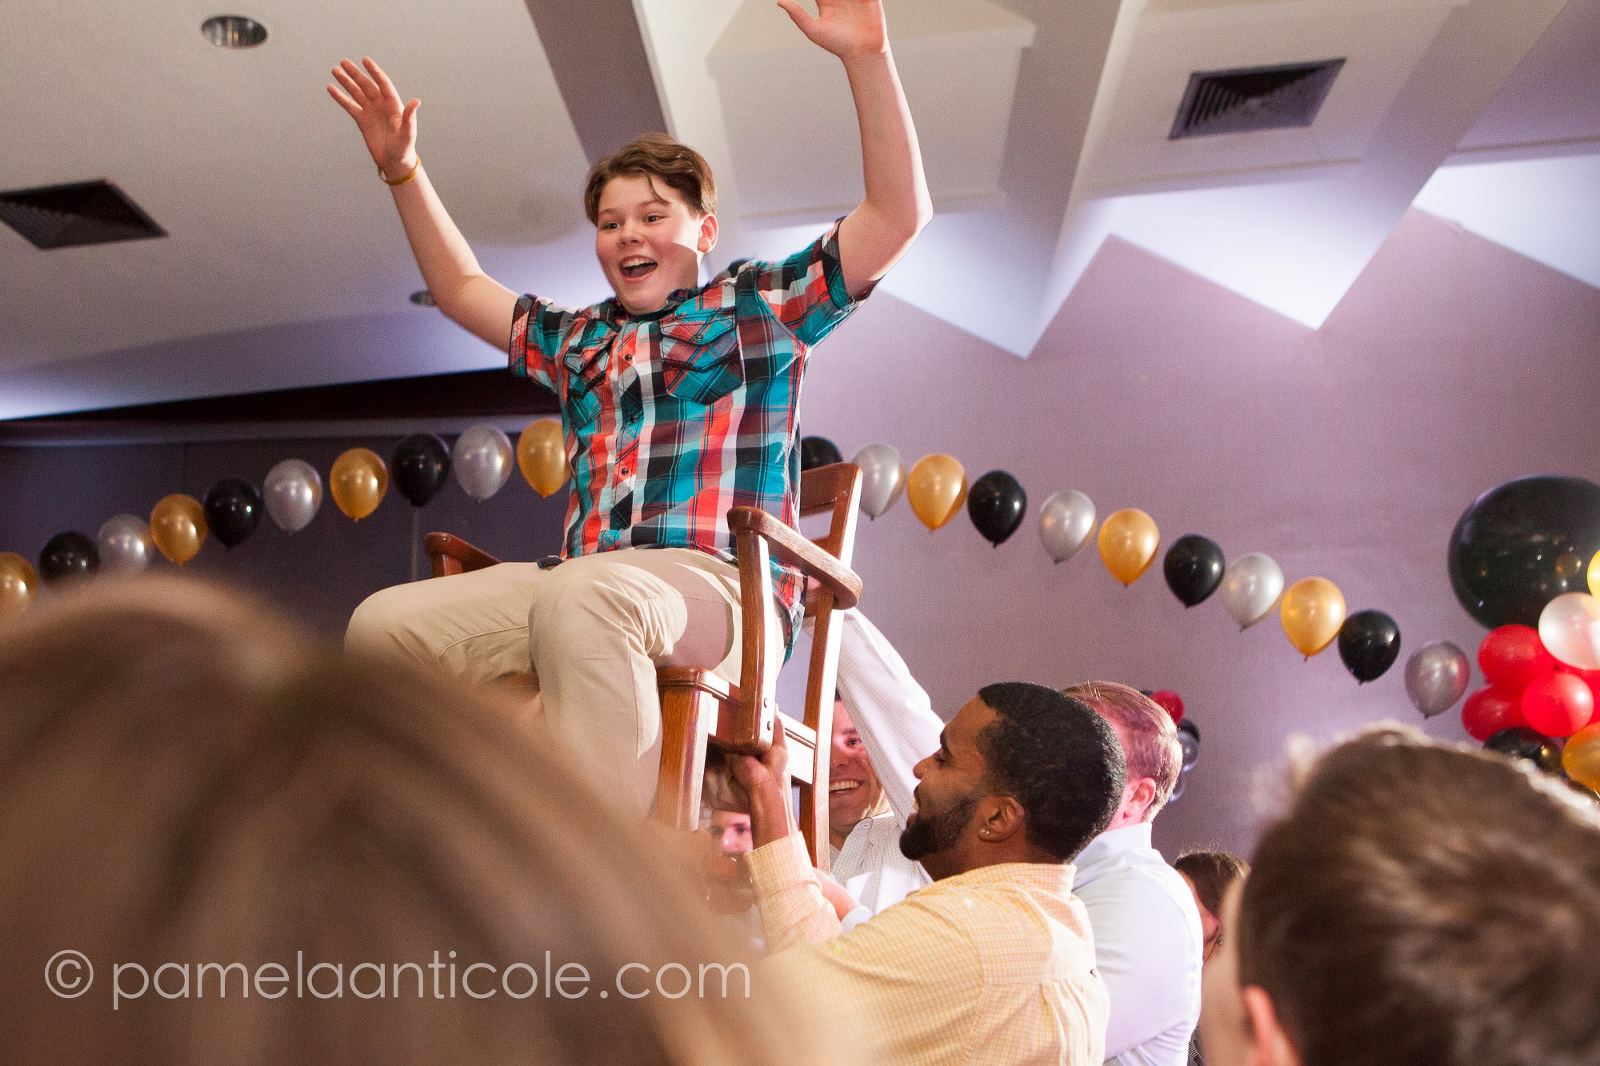 mitzvah boy goes up on a chair at a party, surrounded by friends and family and balloons